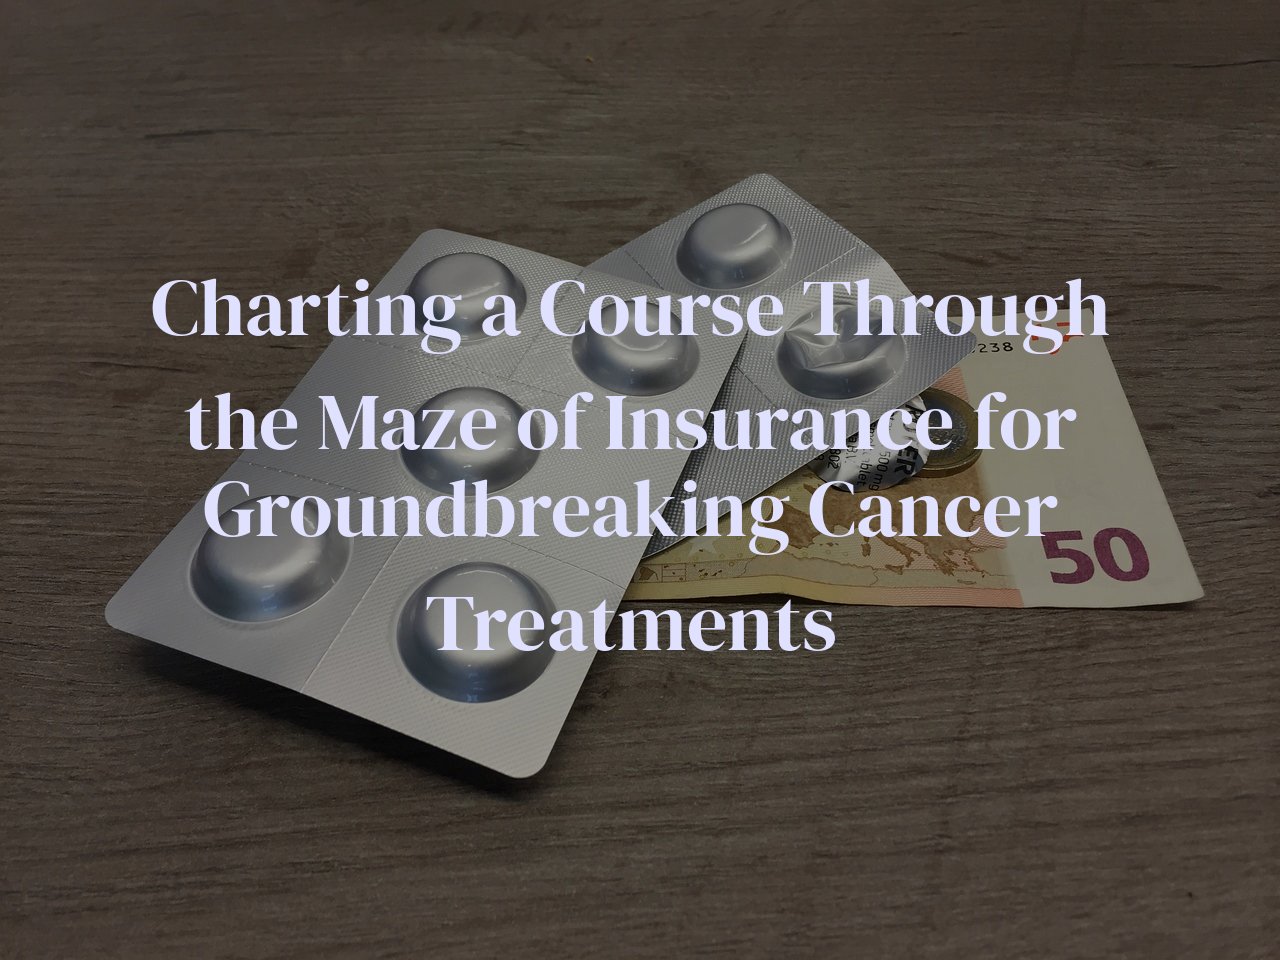 Charting a Course Through the Maze of Insurance for Groundbreaking Cancer Treatments